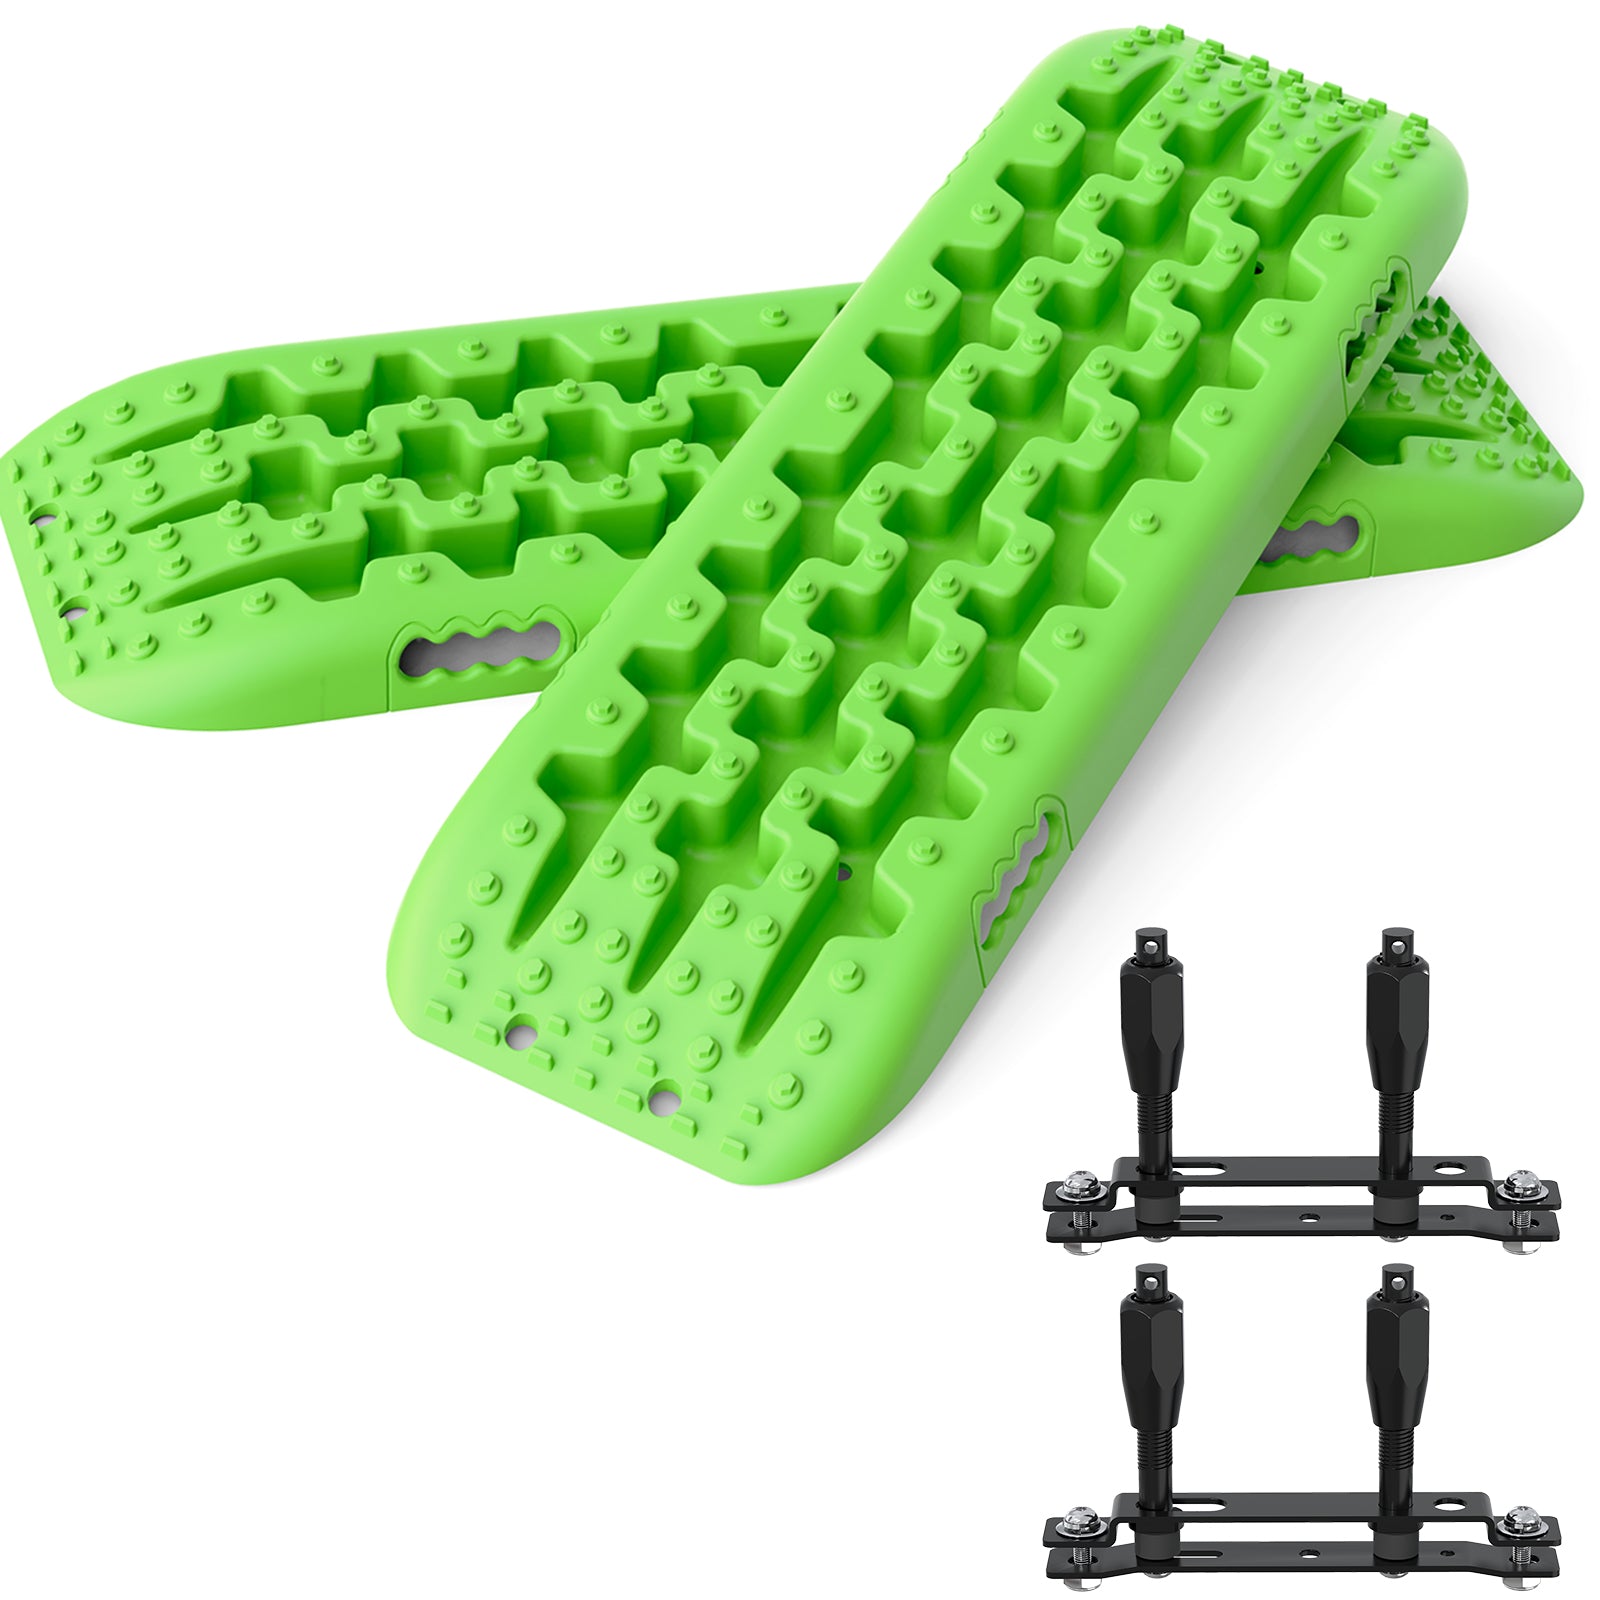 2PCS Recovery Traction Boards & Mounting Kit, 3rd Gen (Green